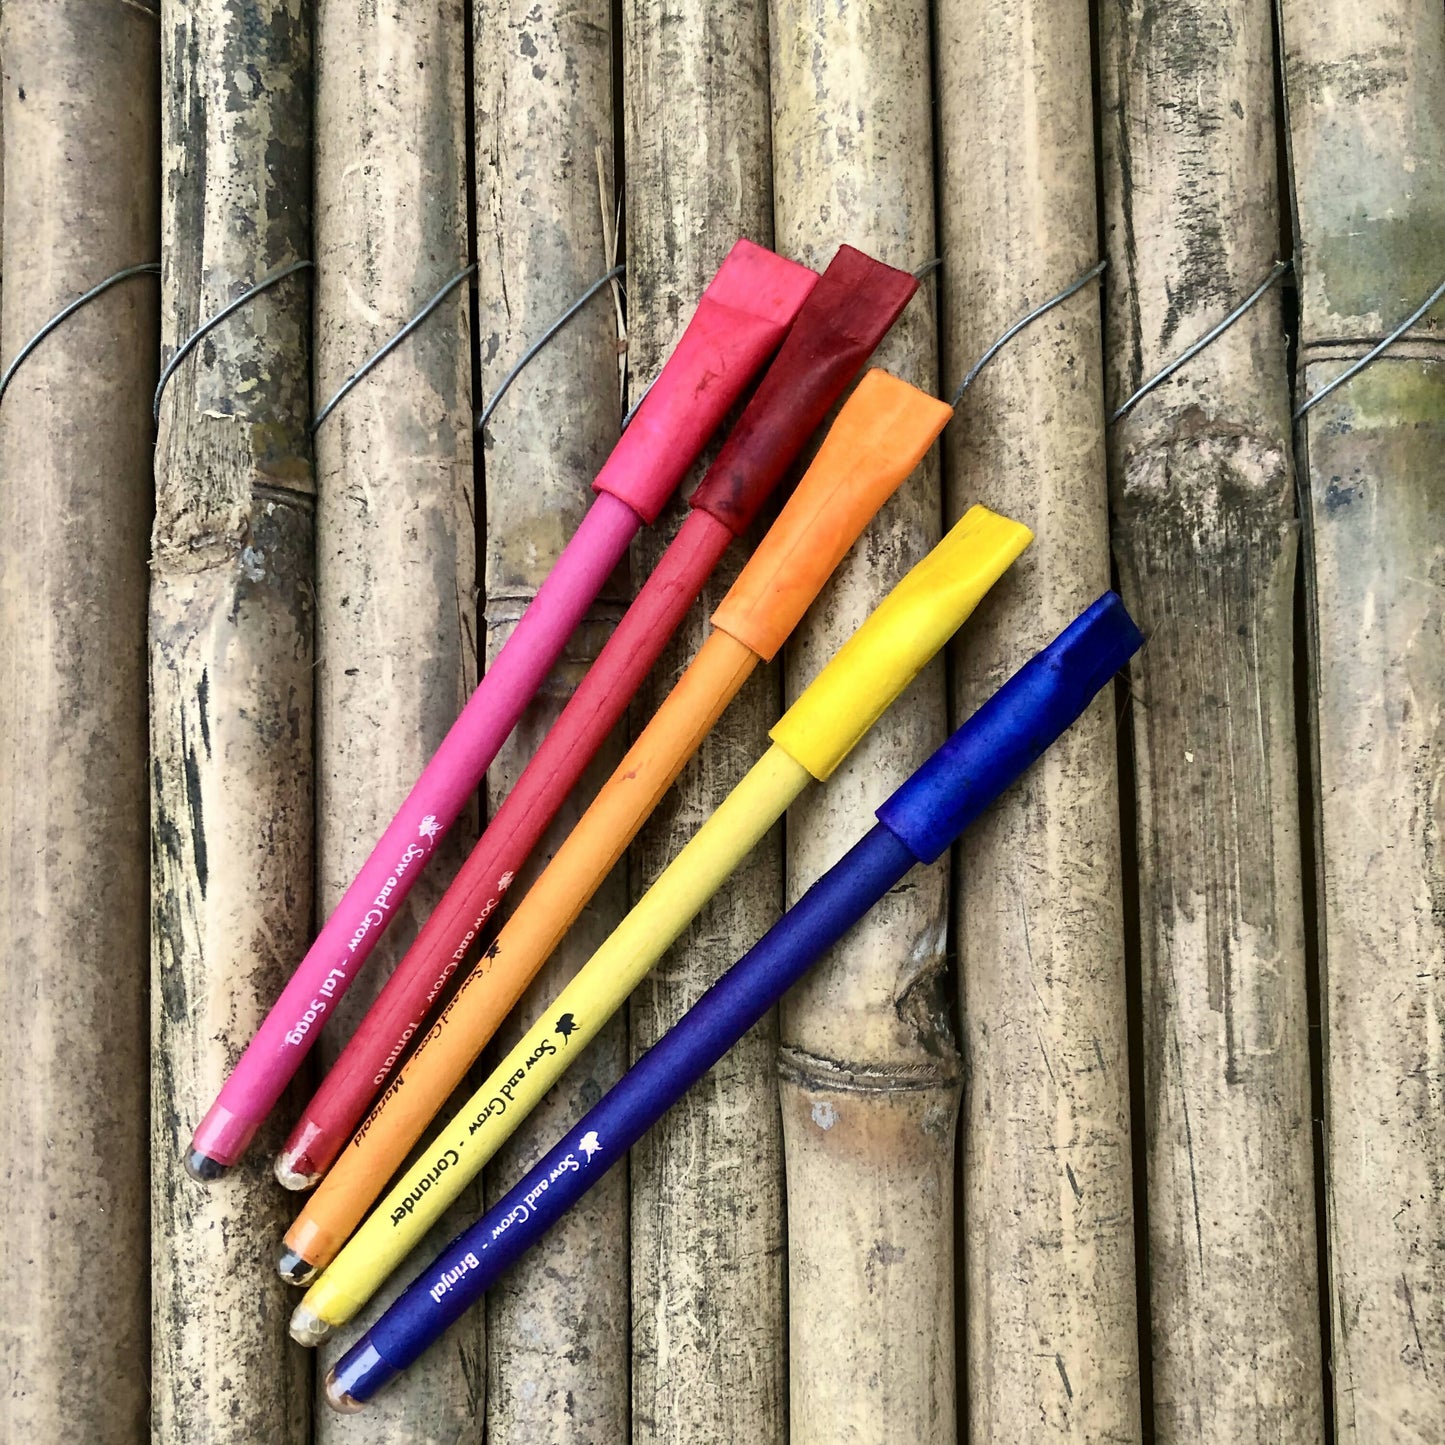 Plantable Seed Paper Pens Colourful (Pack of 10 Single Pens)